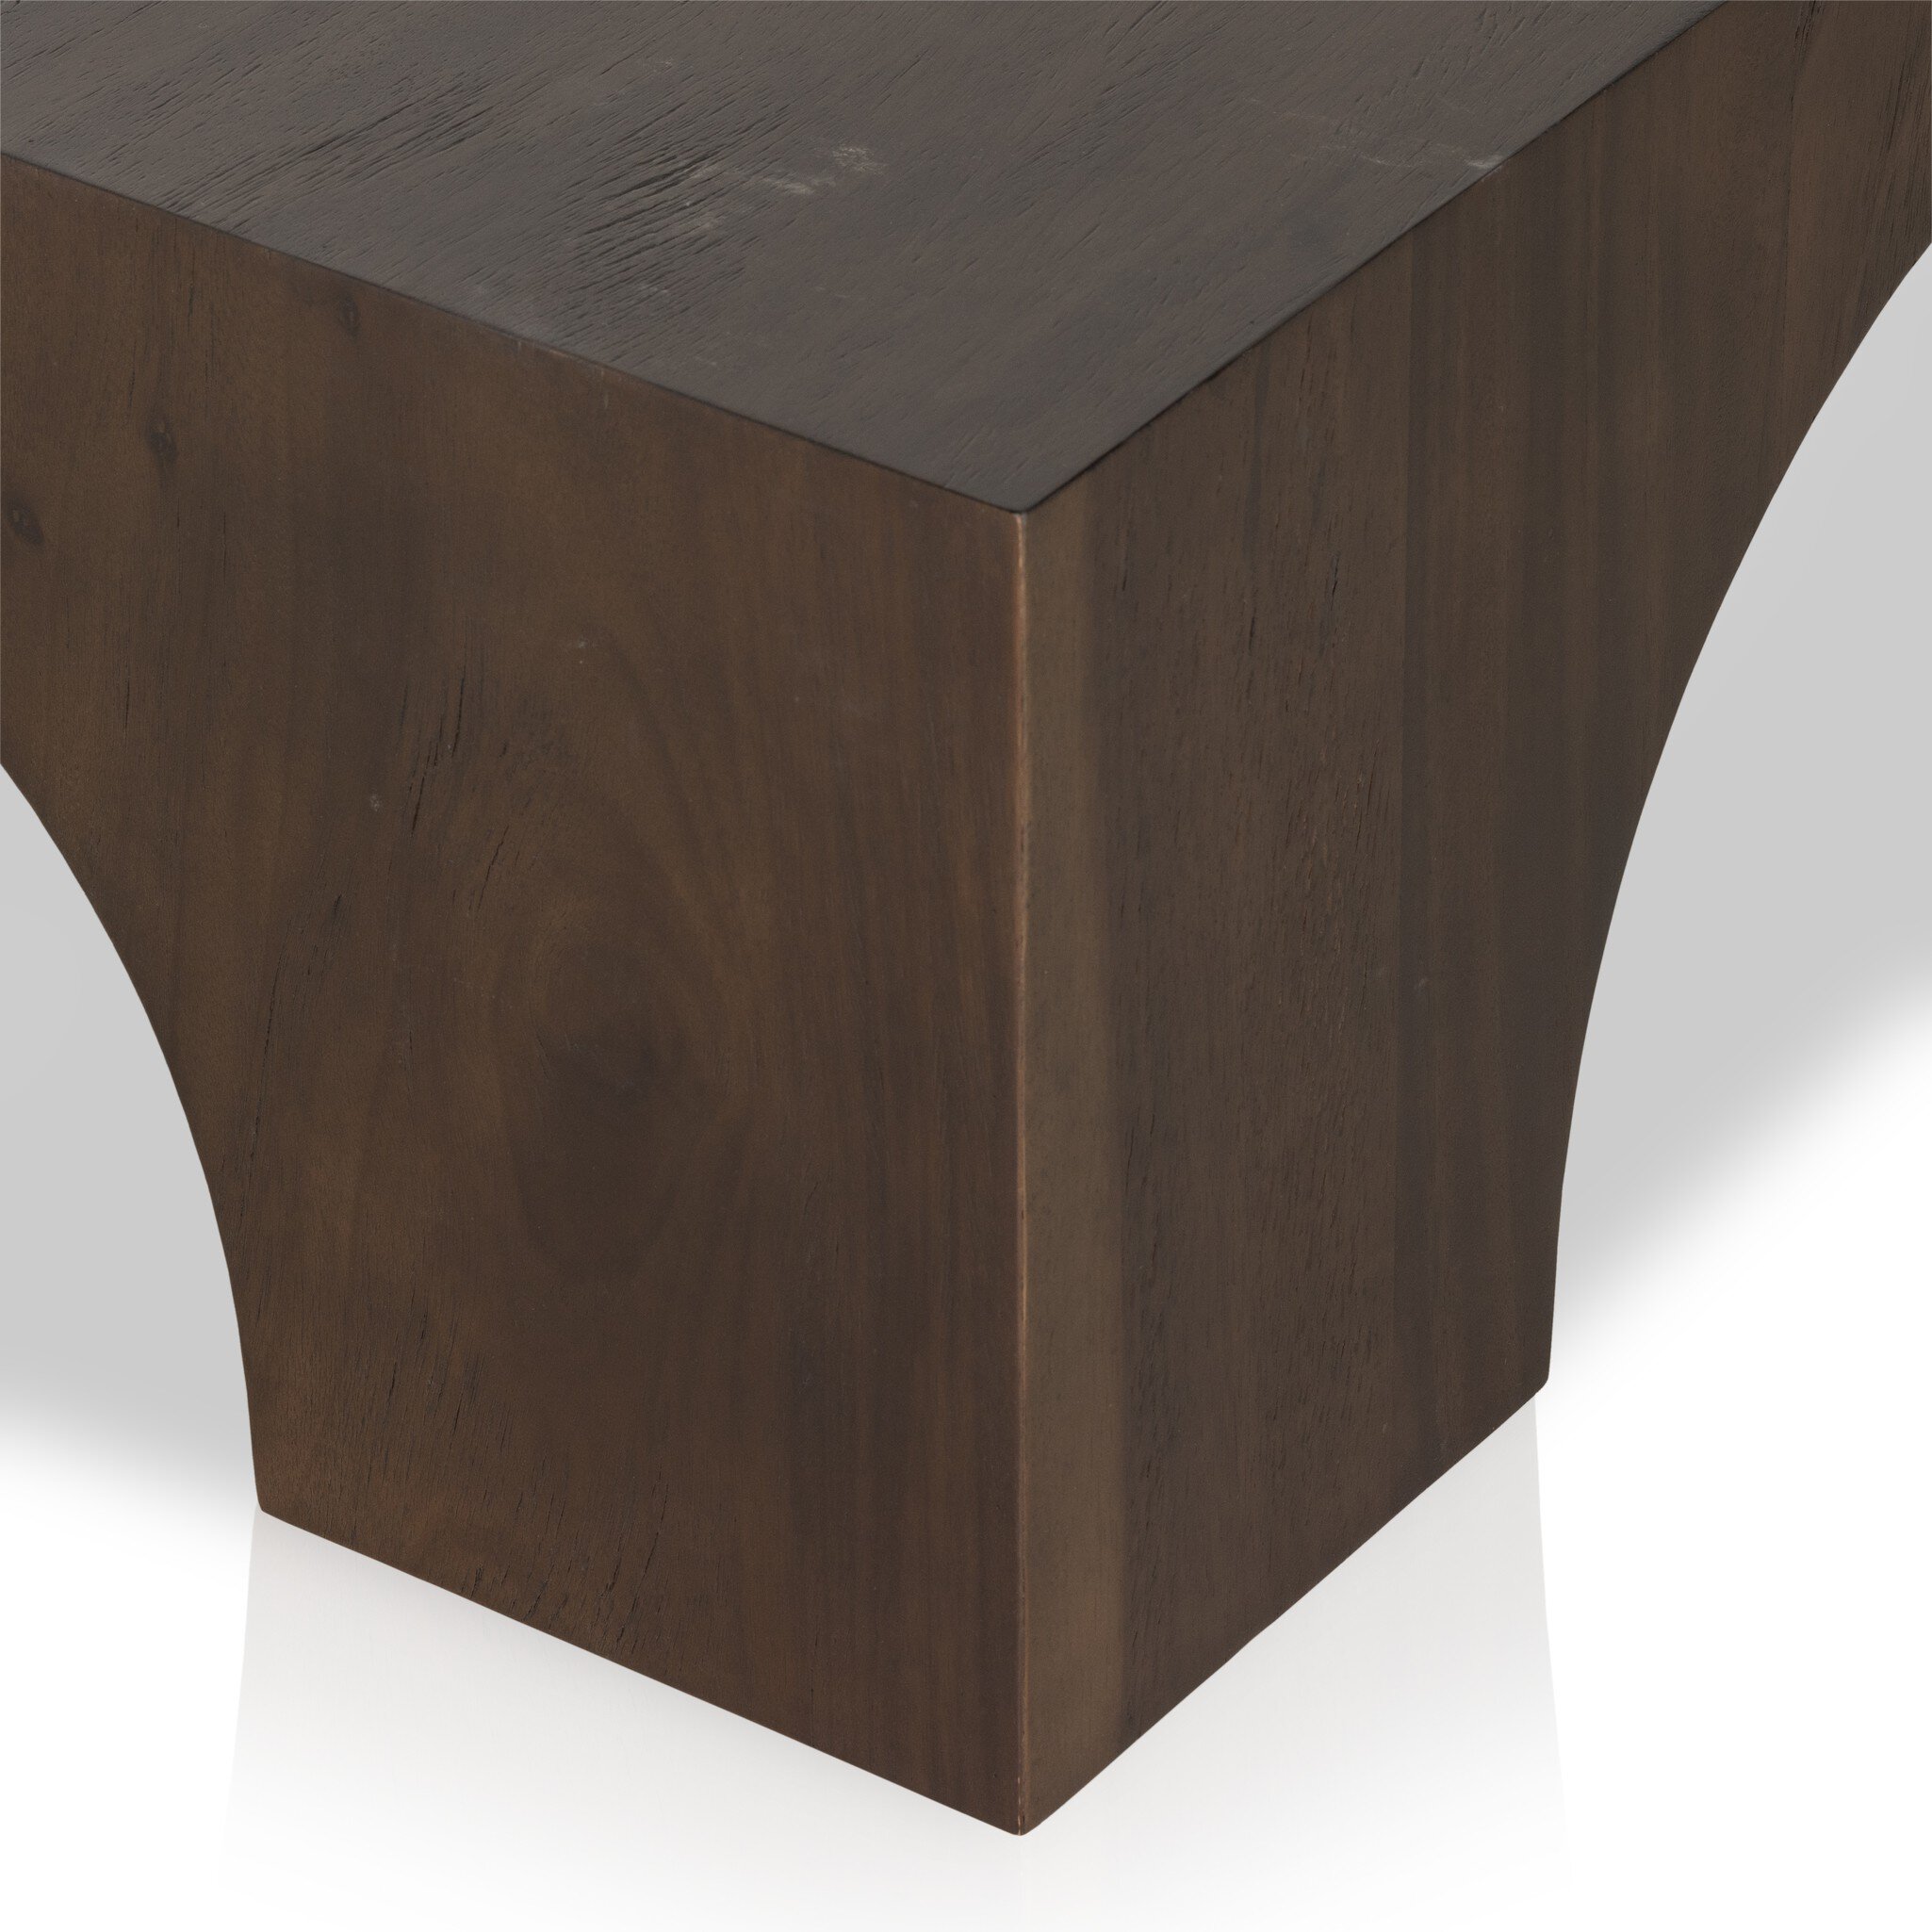 A detail shot of The Fausto dark wood coffee table by Four Hands, also available in Bleached wood.